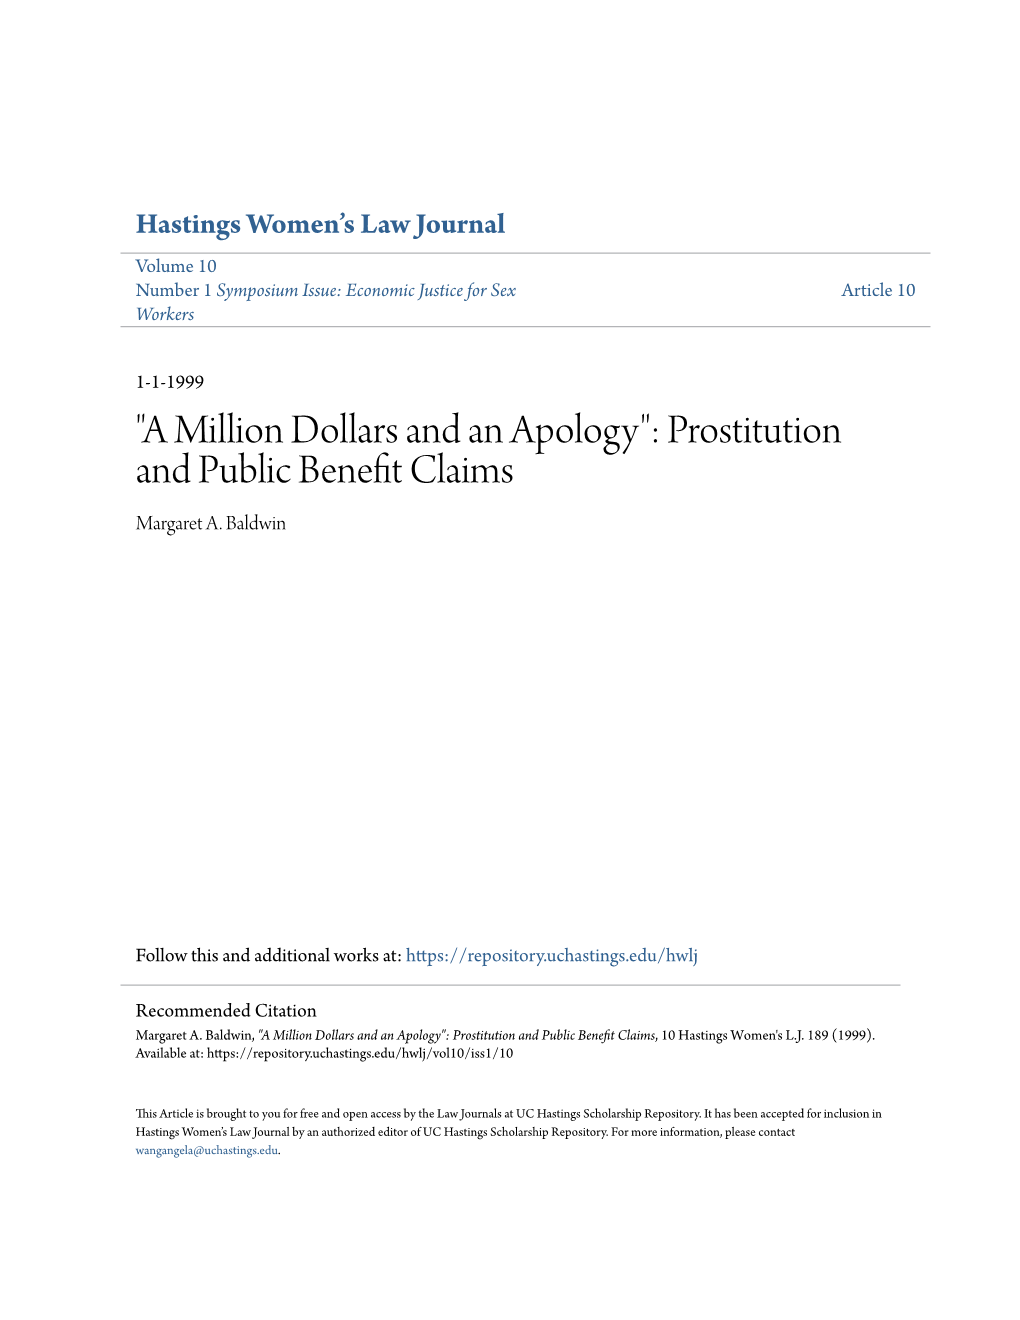 "A Million Dollars and an Apology": Prostitution and Public Benefit Claims